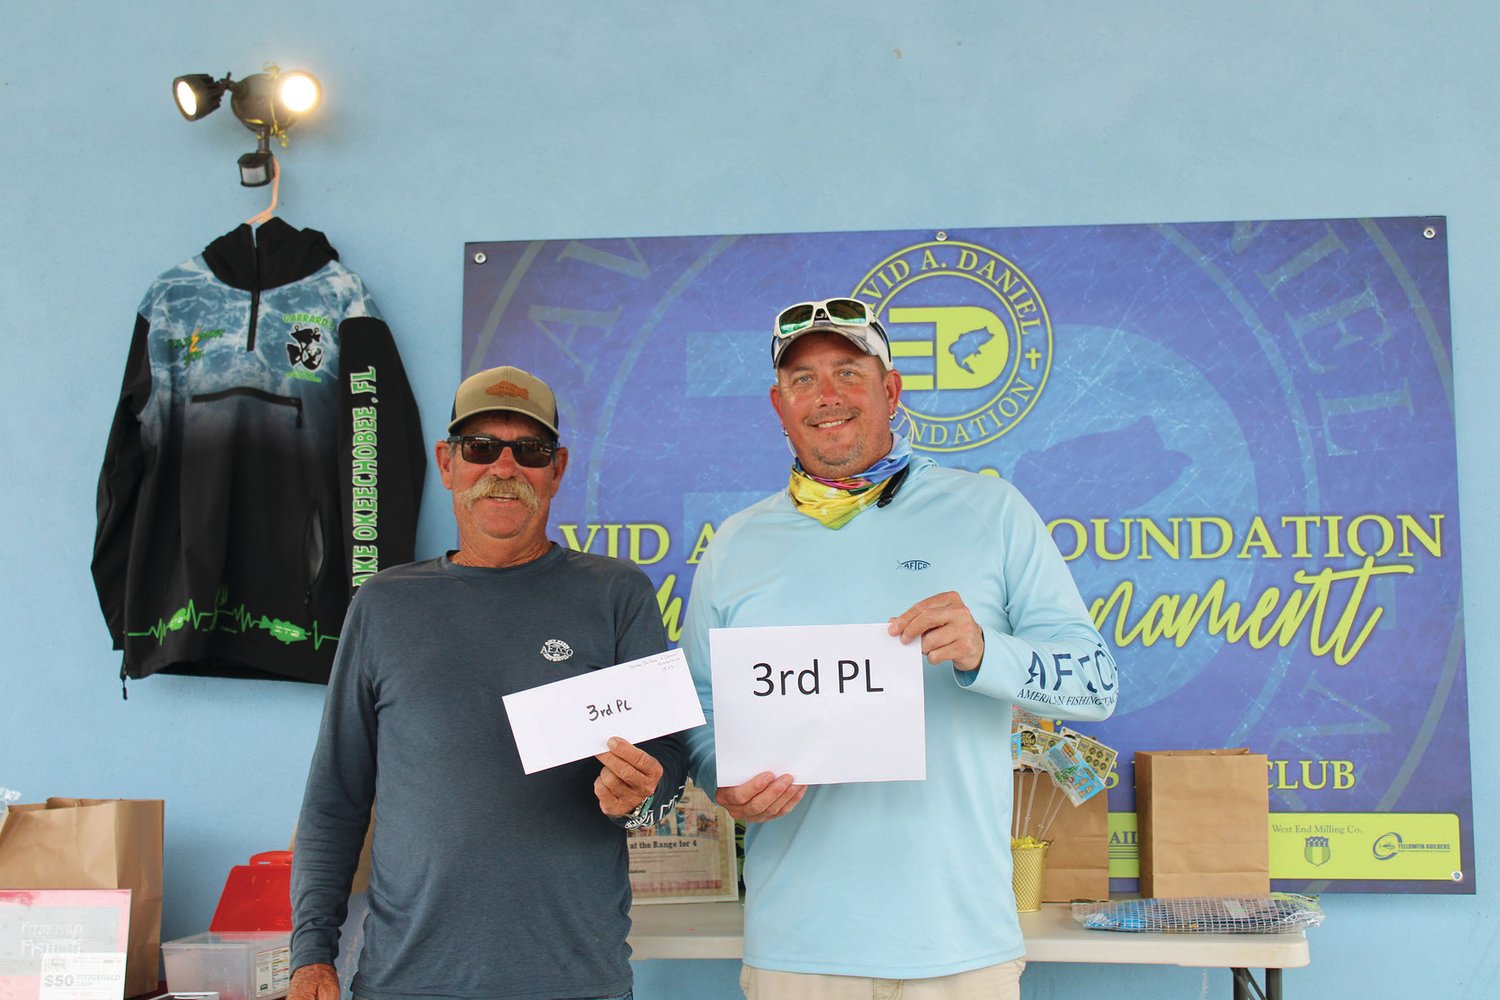 Third place with 15.03 pounds went to Bobby Dupree and Dan Hinkelman.